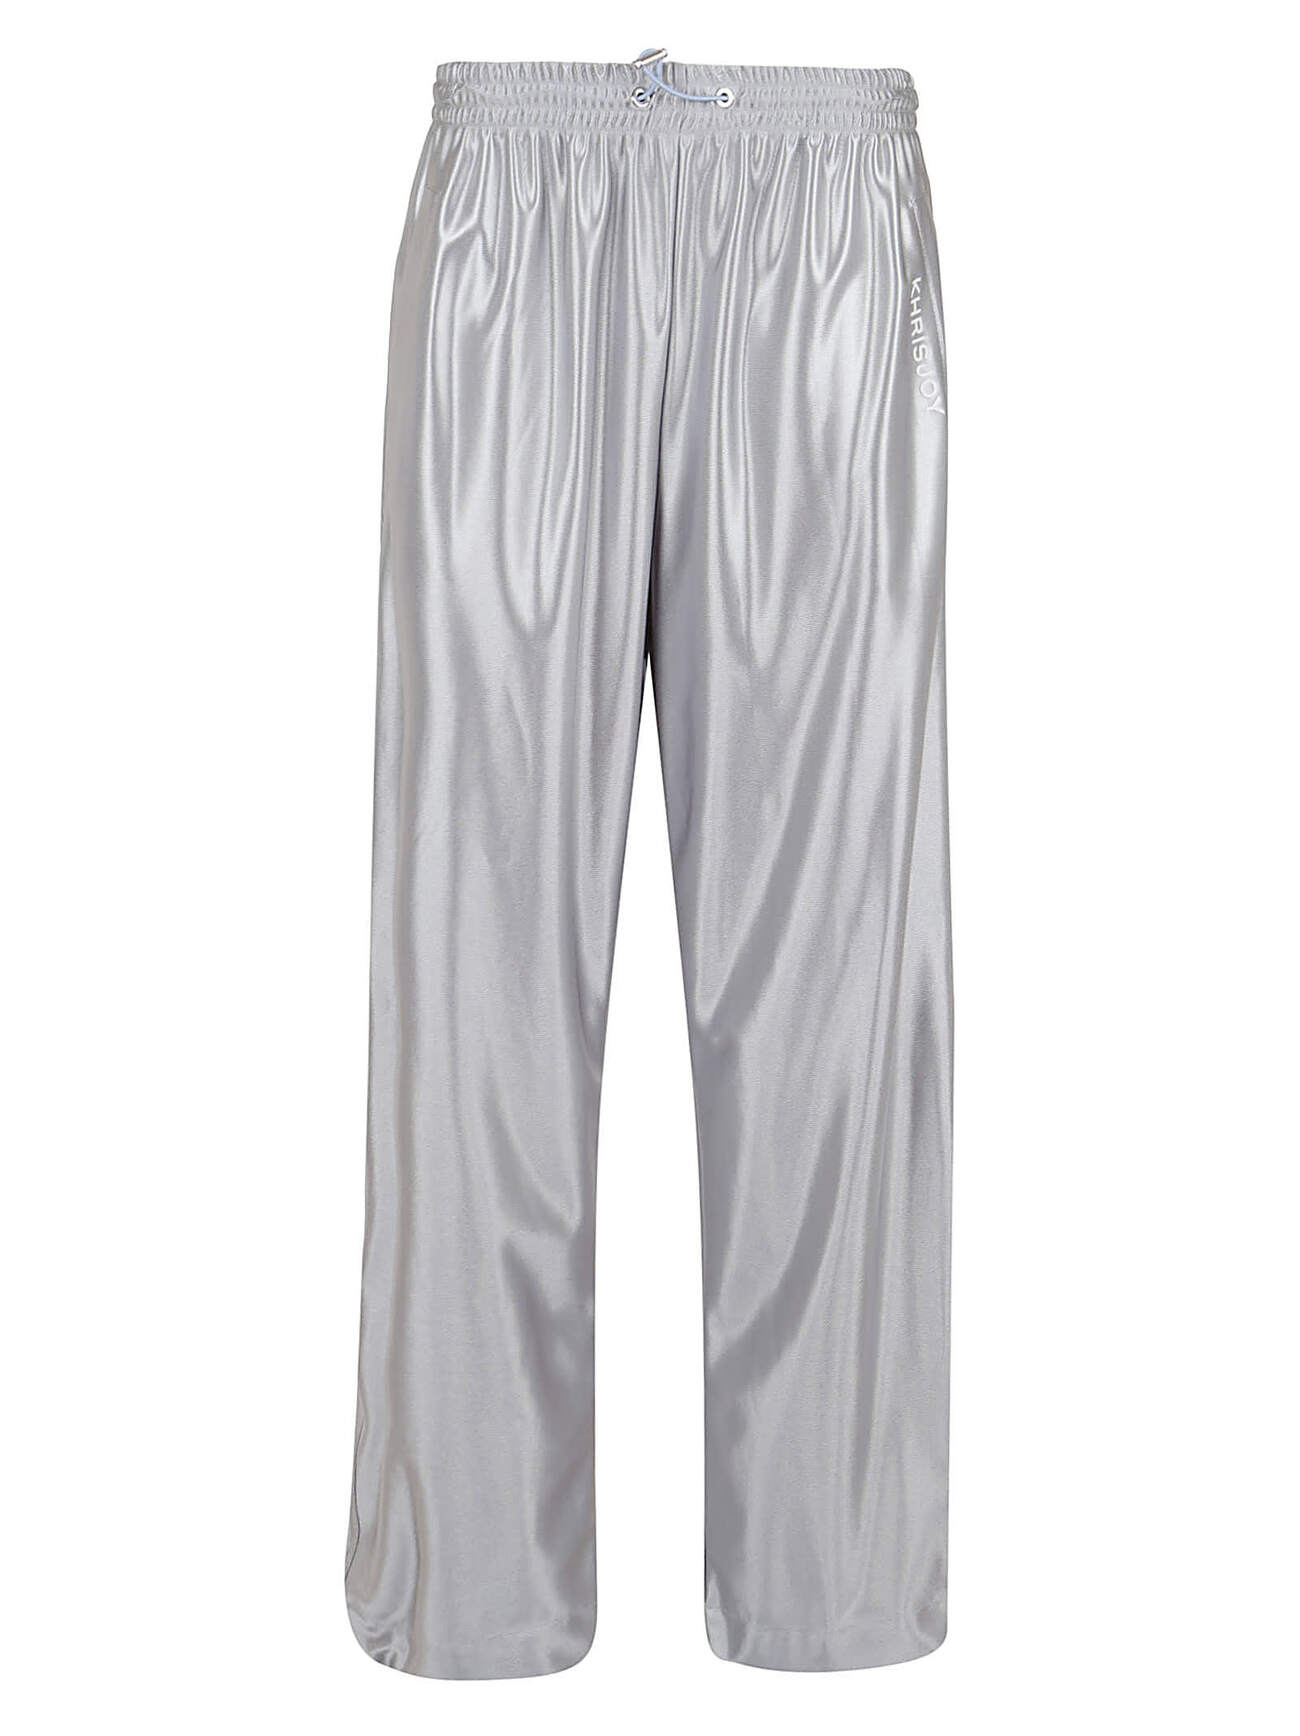 Khrisjoy Tracksuit Pant Satin in silver